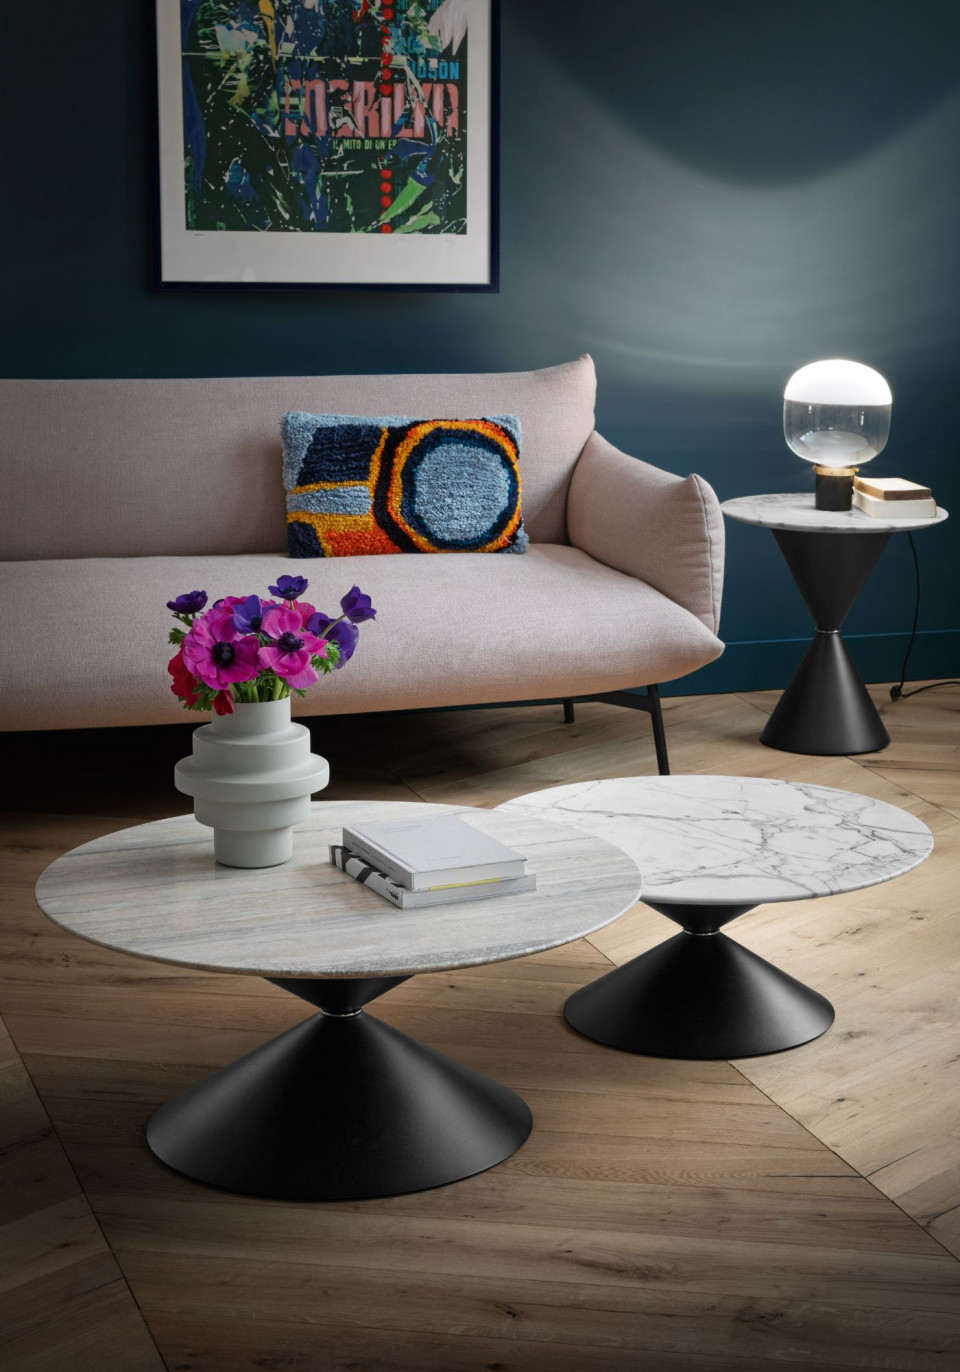 Clessidra coffee table designed by Paolo Vernier for Midj